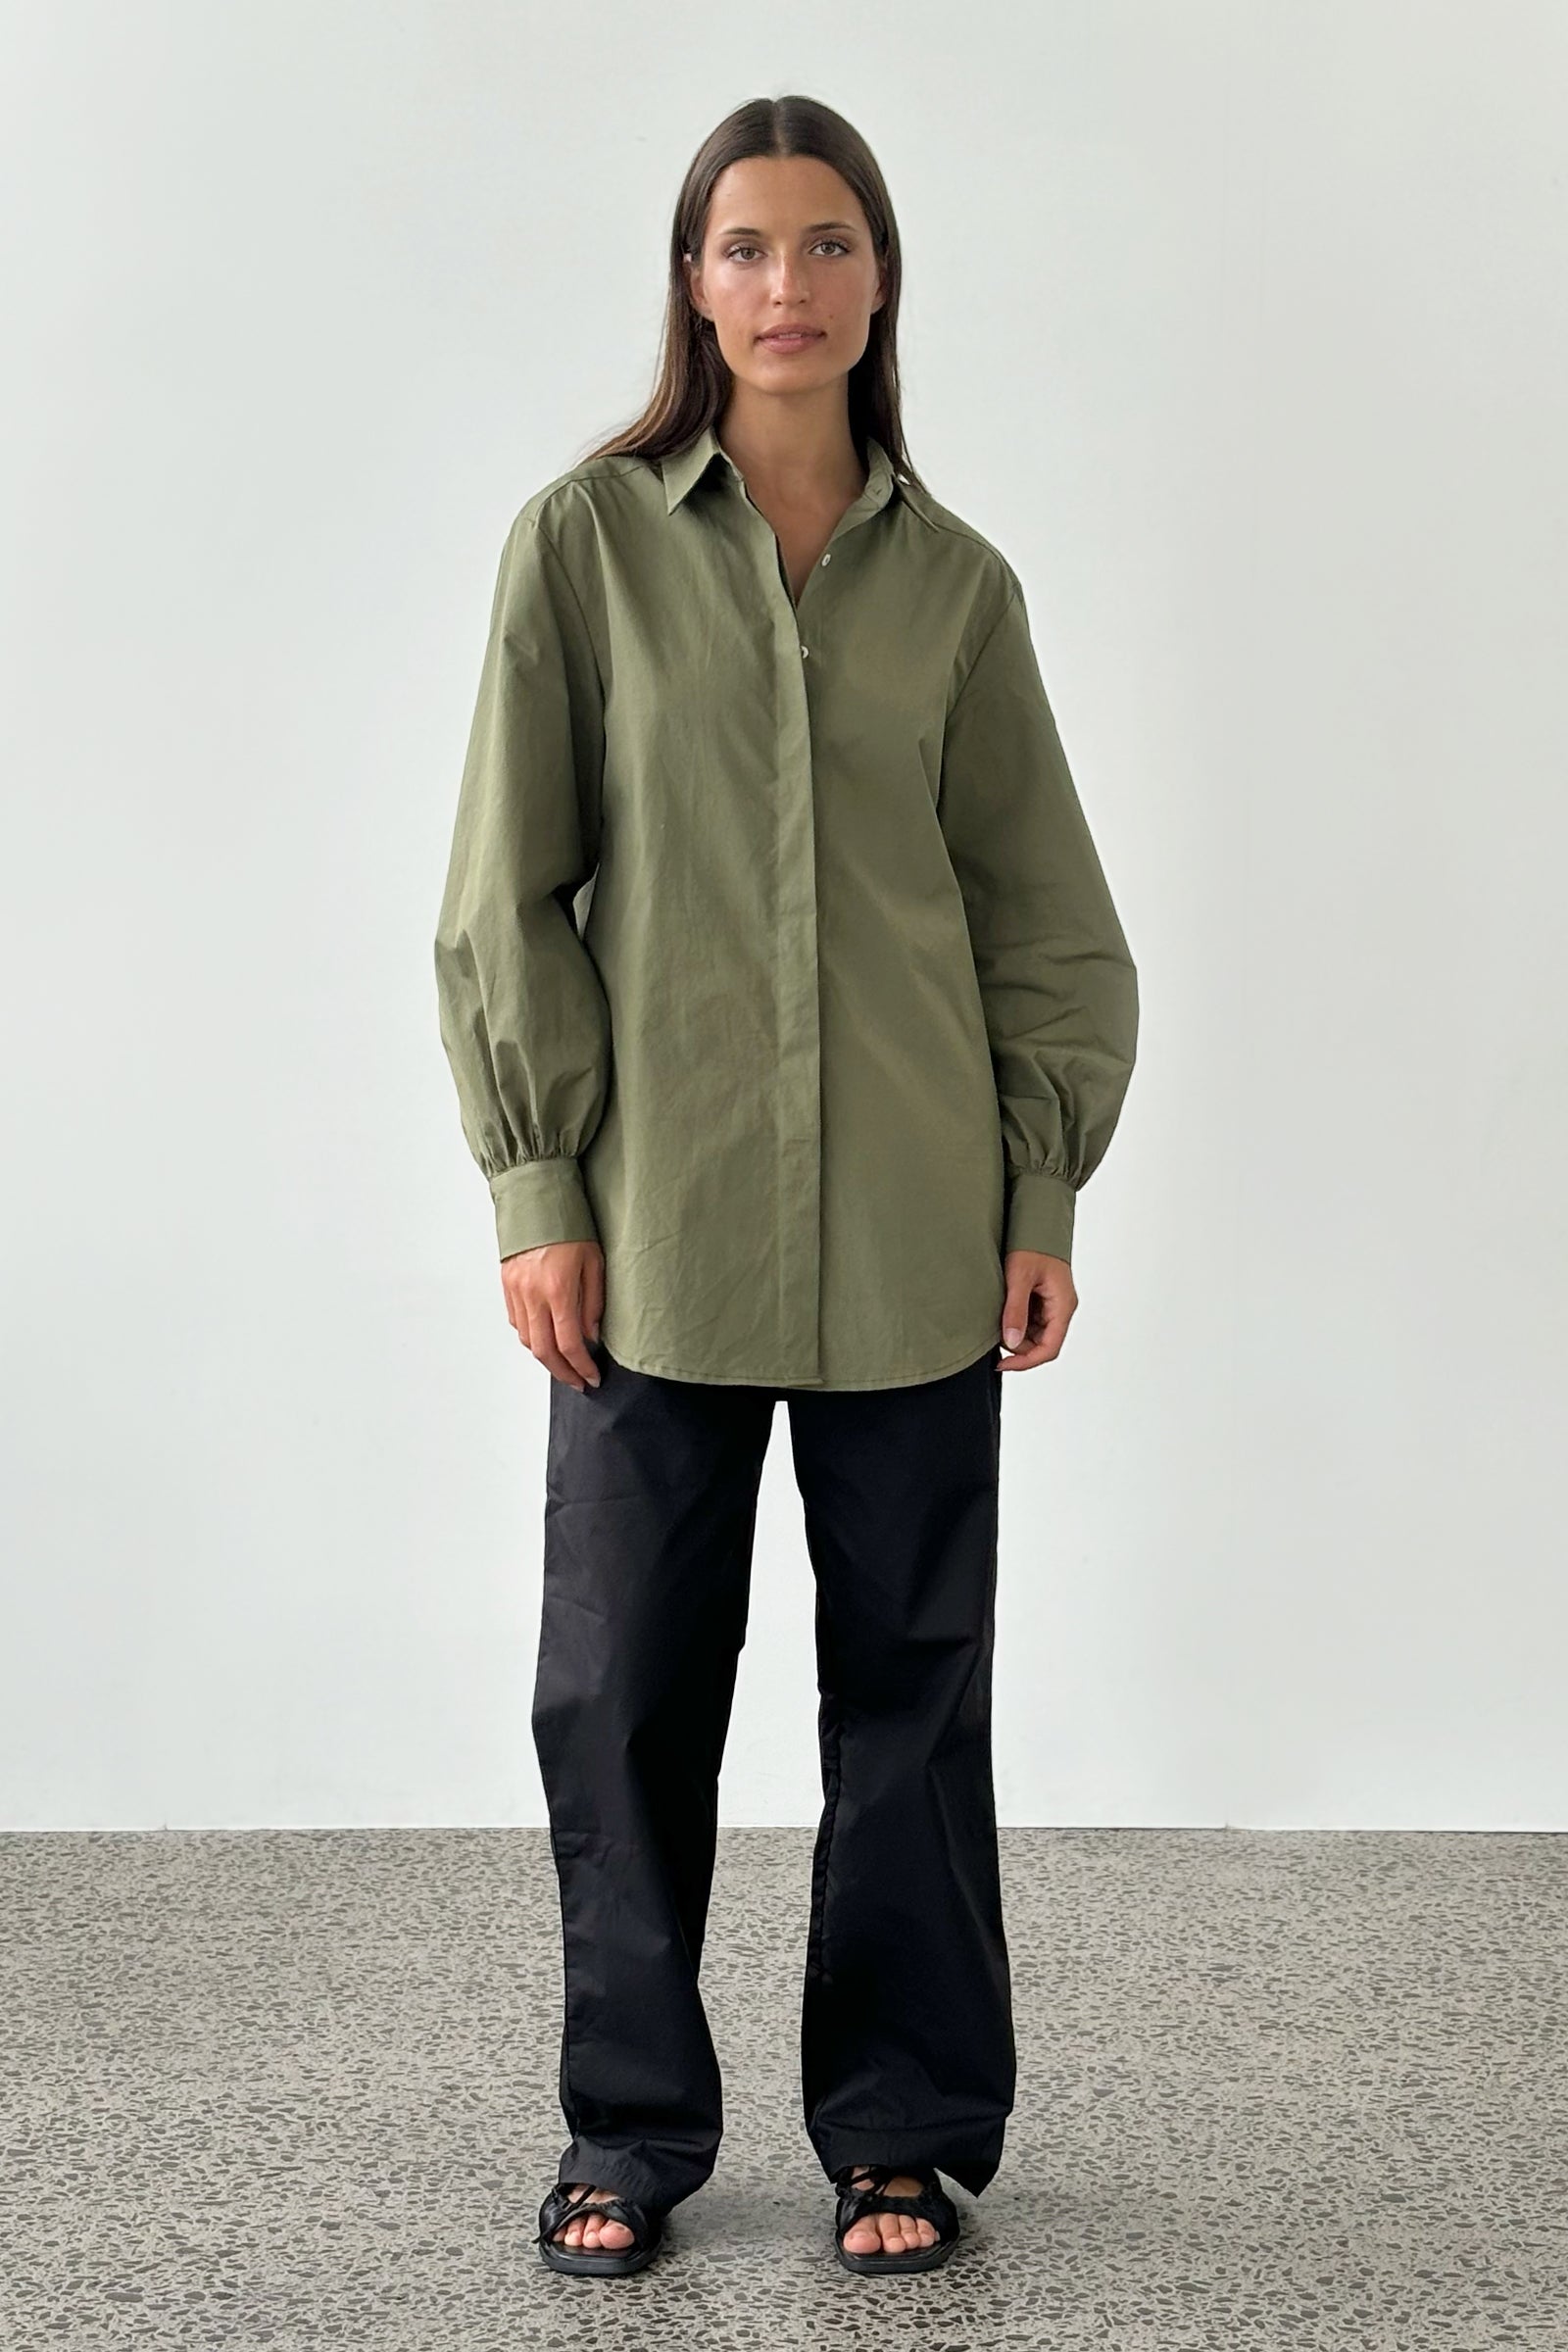 Mes Cotton Overshirt in Olive